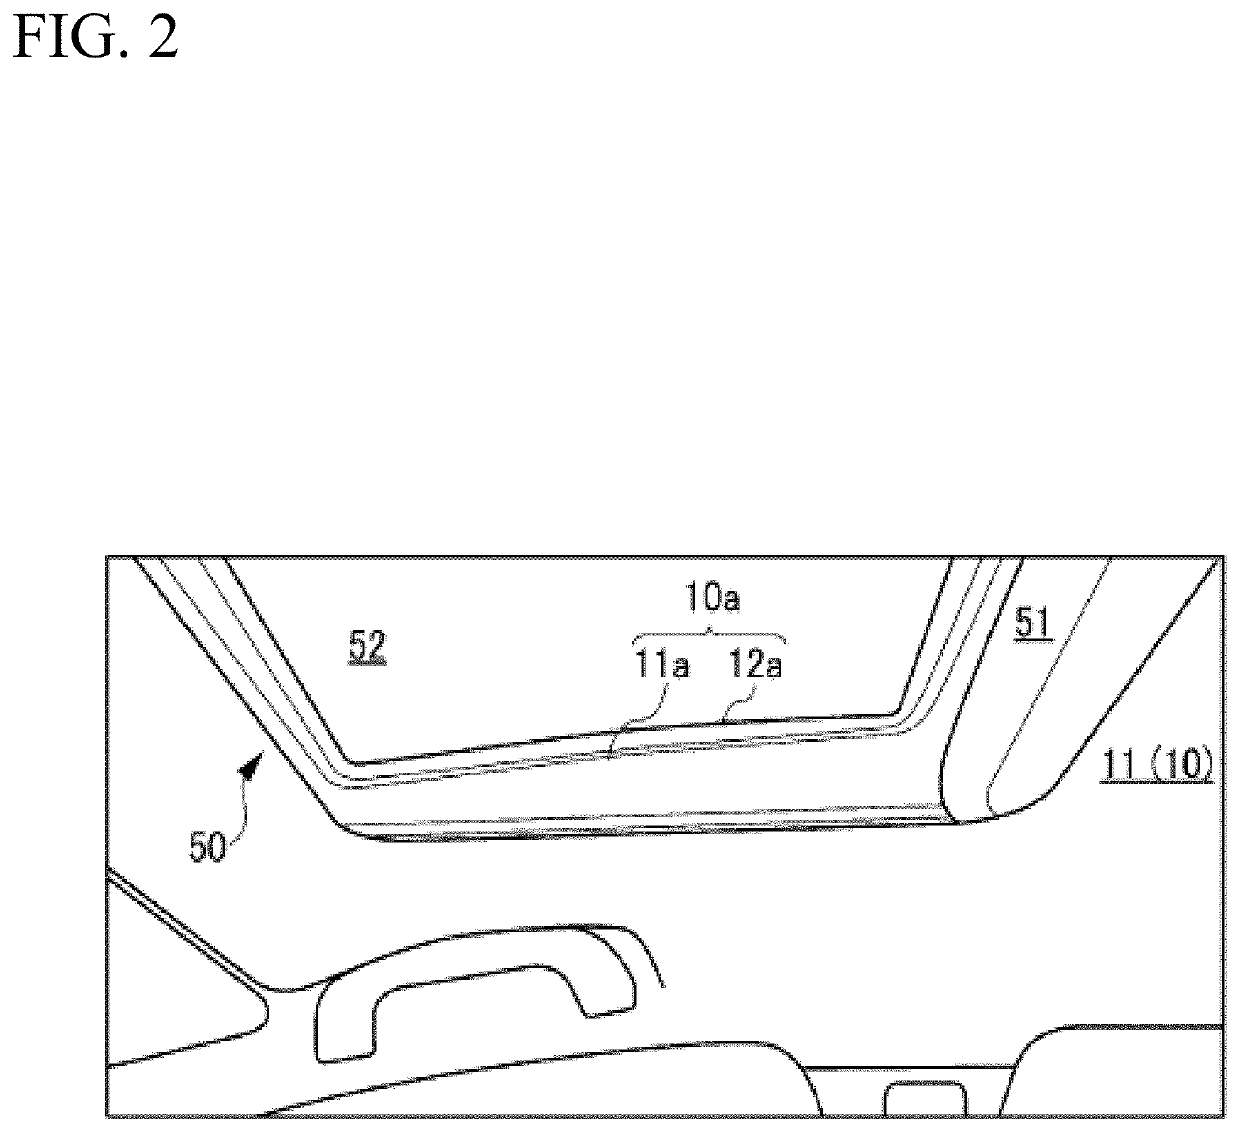 Illumination portion for illuminating a roof opening portion of a vehicle